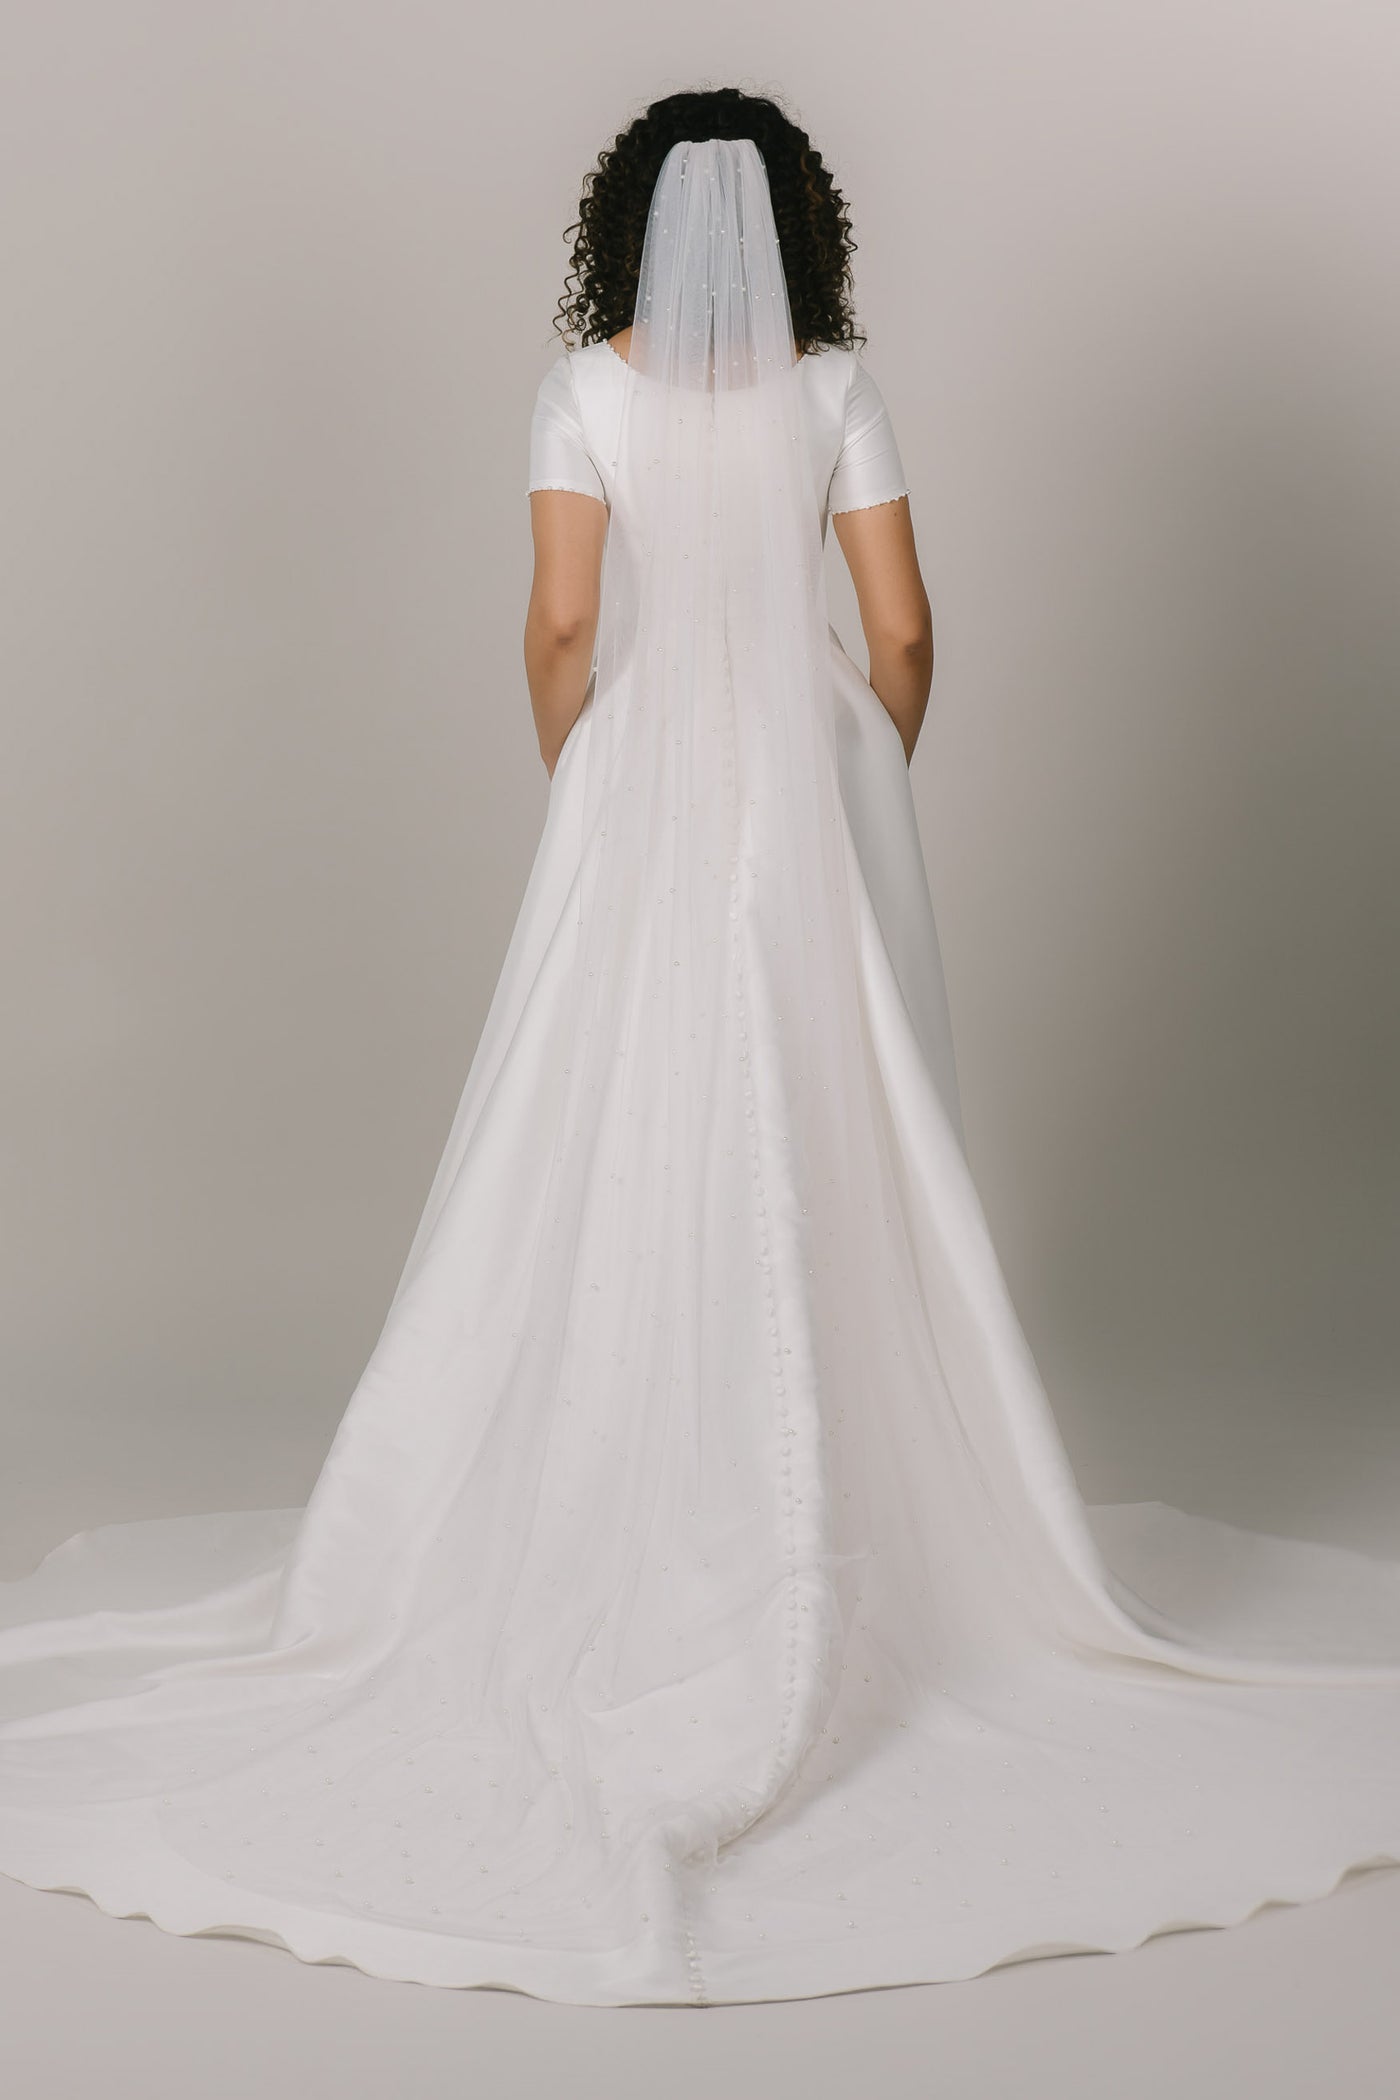 This is a veil with pearl details and it is chapel length.